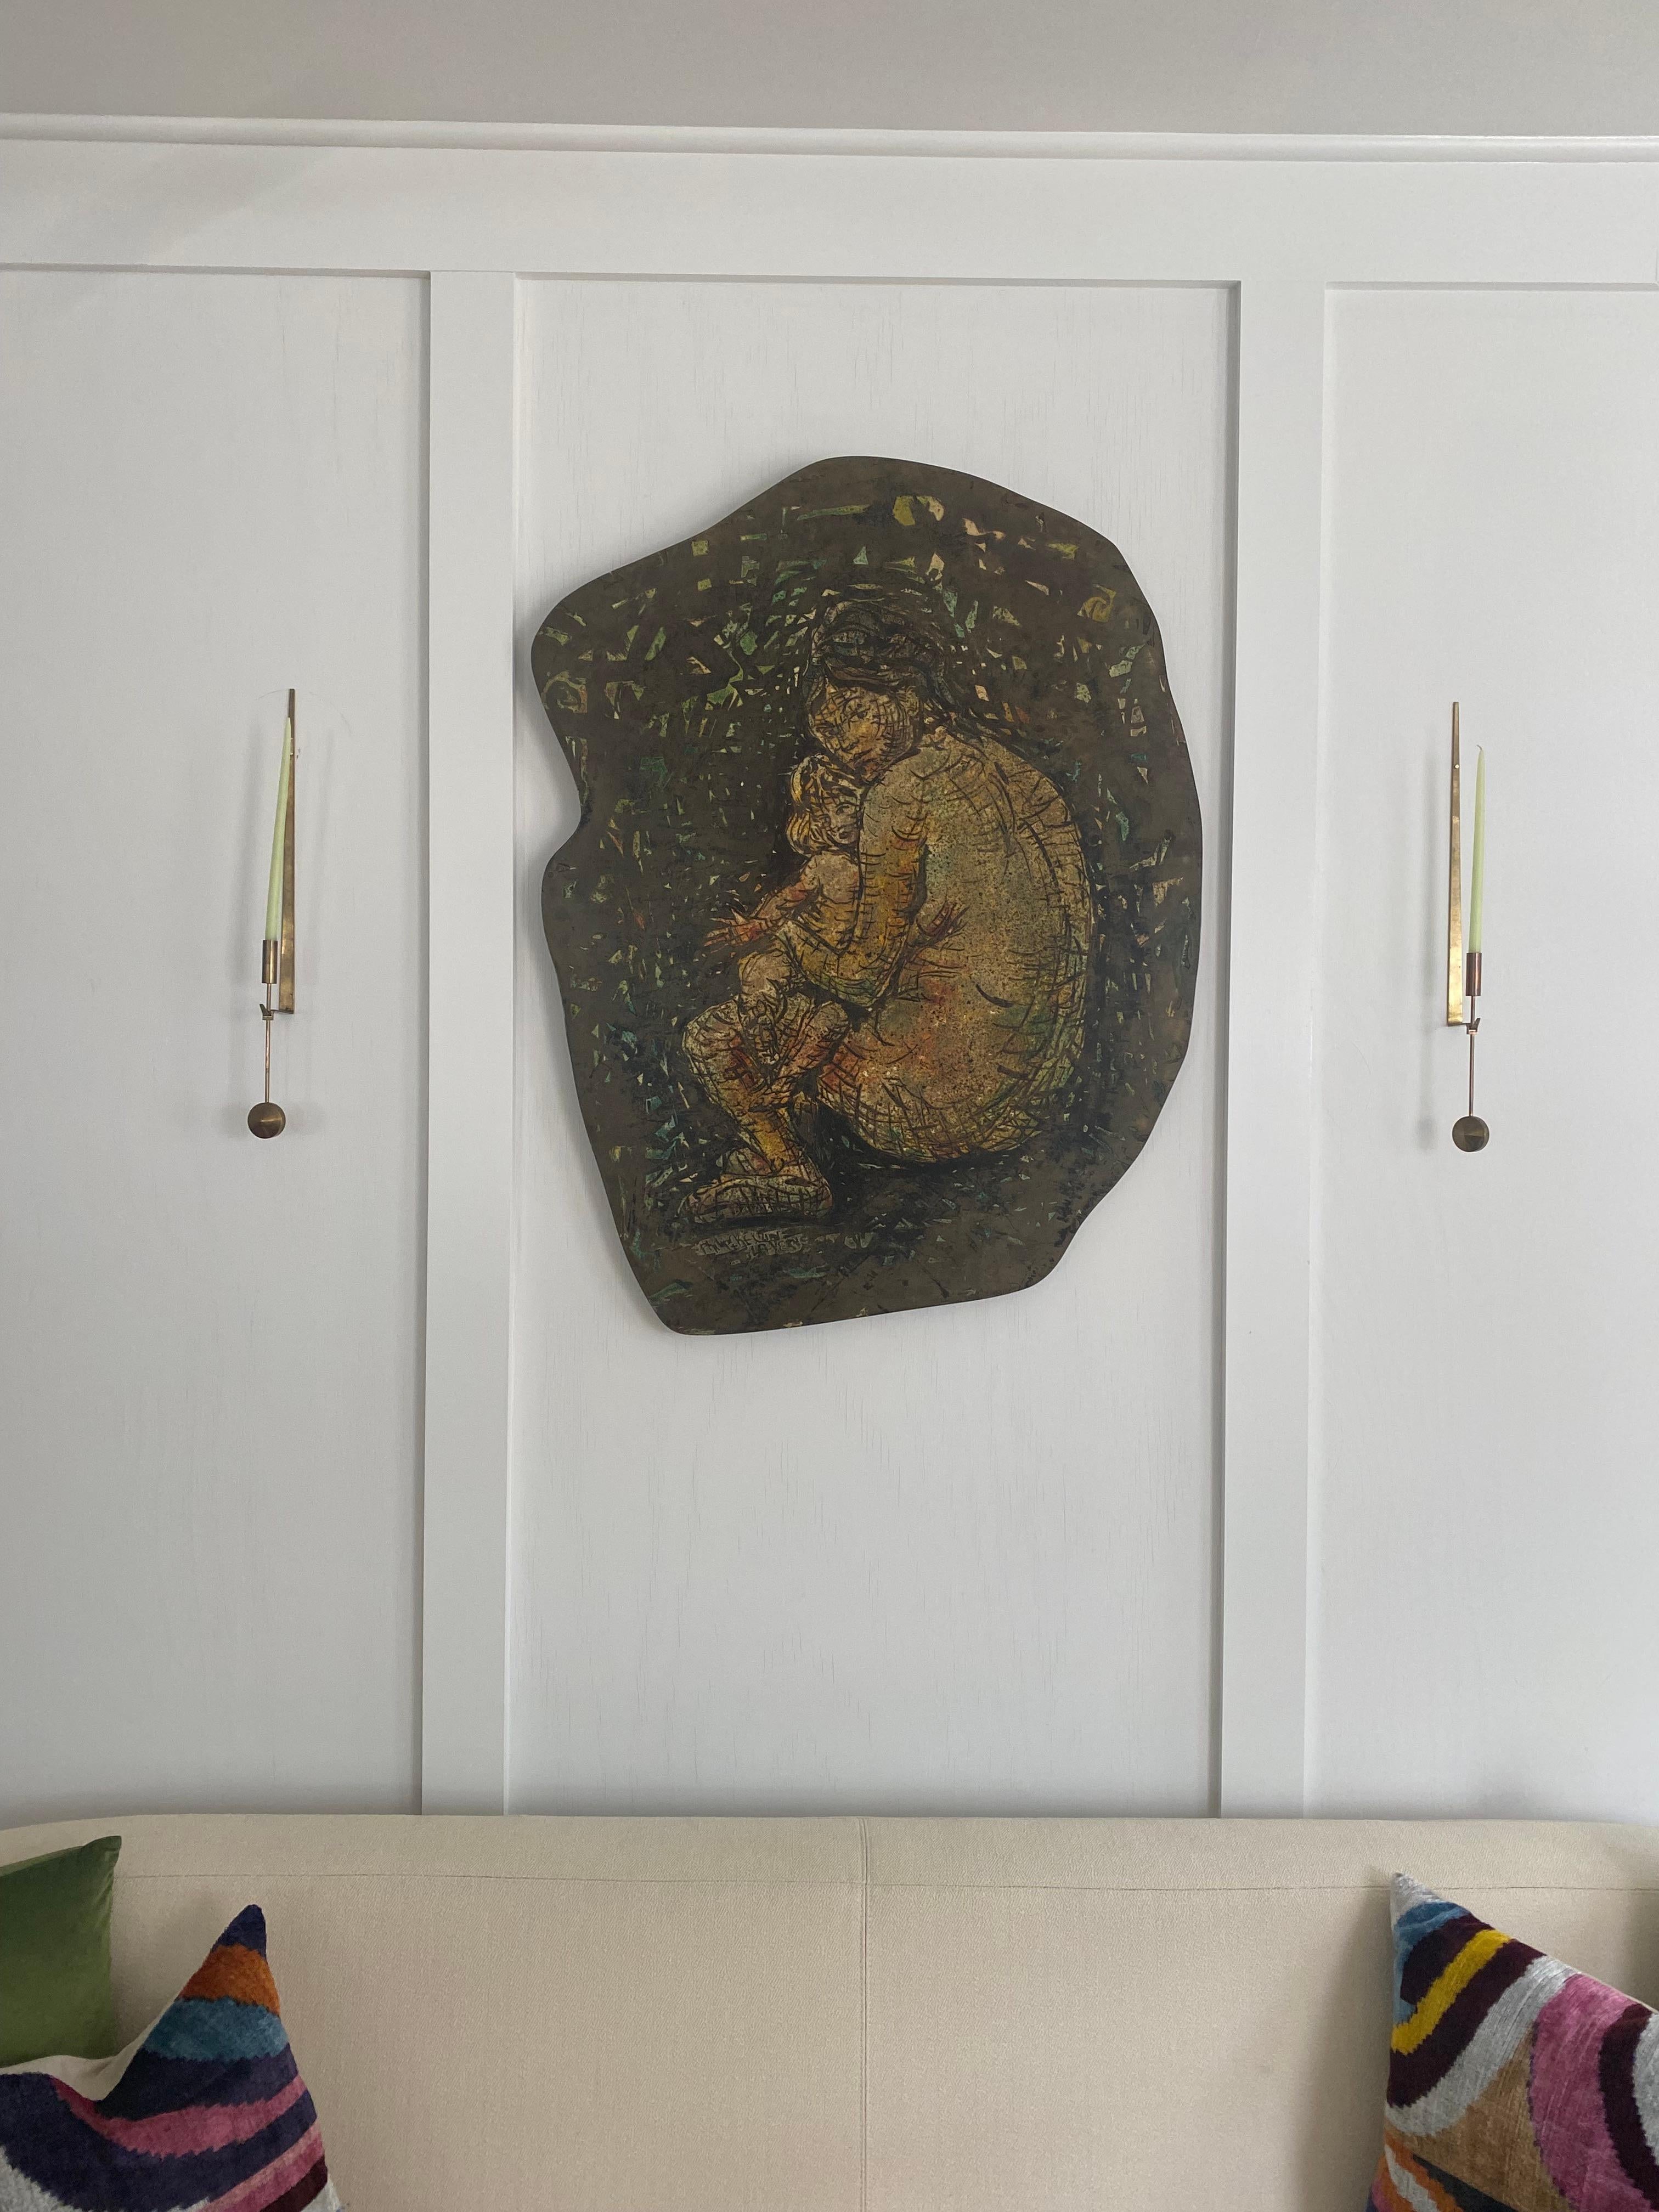 Signed Laverne bronze/ mixed metal wall art of Mother and Child.
Mid century heavy art - unusual biomorphic shape.
Etched signature and gallery label on back.
approx
36 x 28 x 1.125 inches
Heavy item.